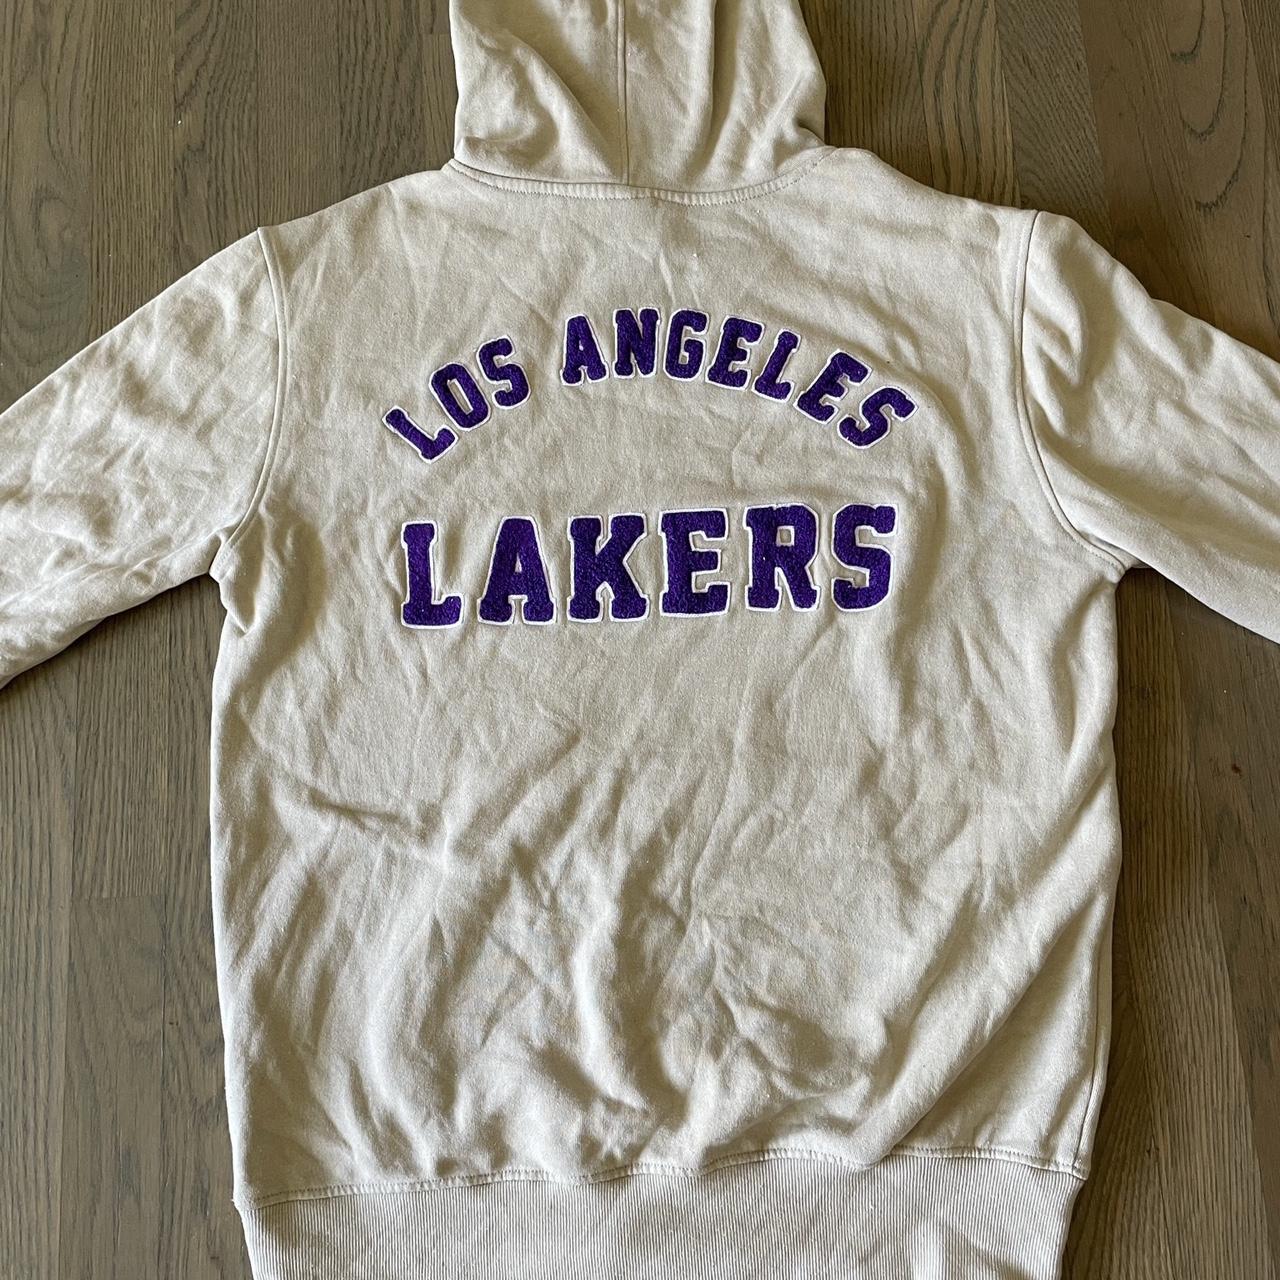 Urban Outfitters Lakers Hoodie Purple Size L - $20 - From Abney